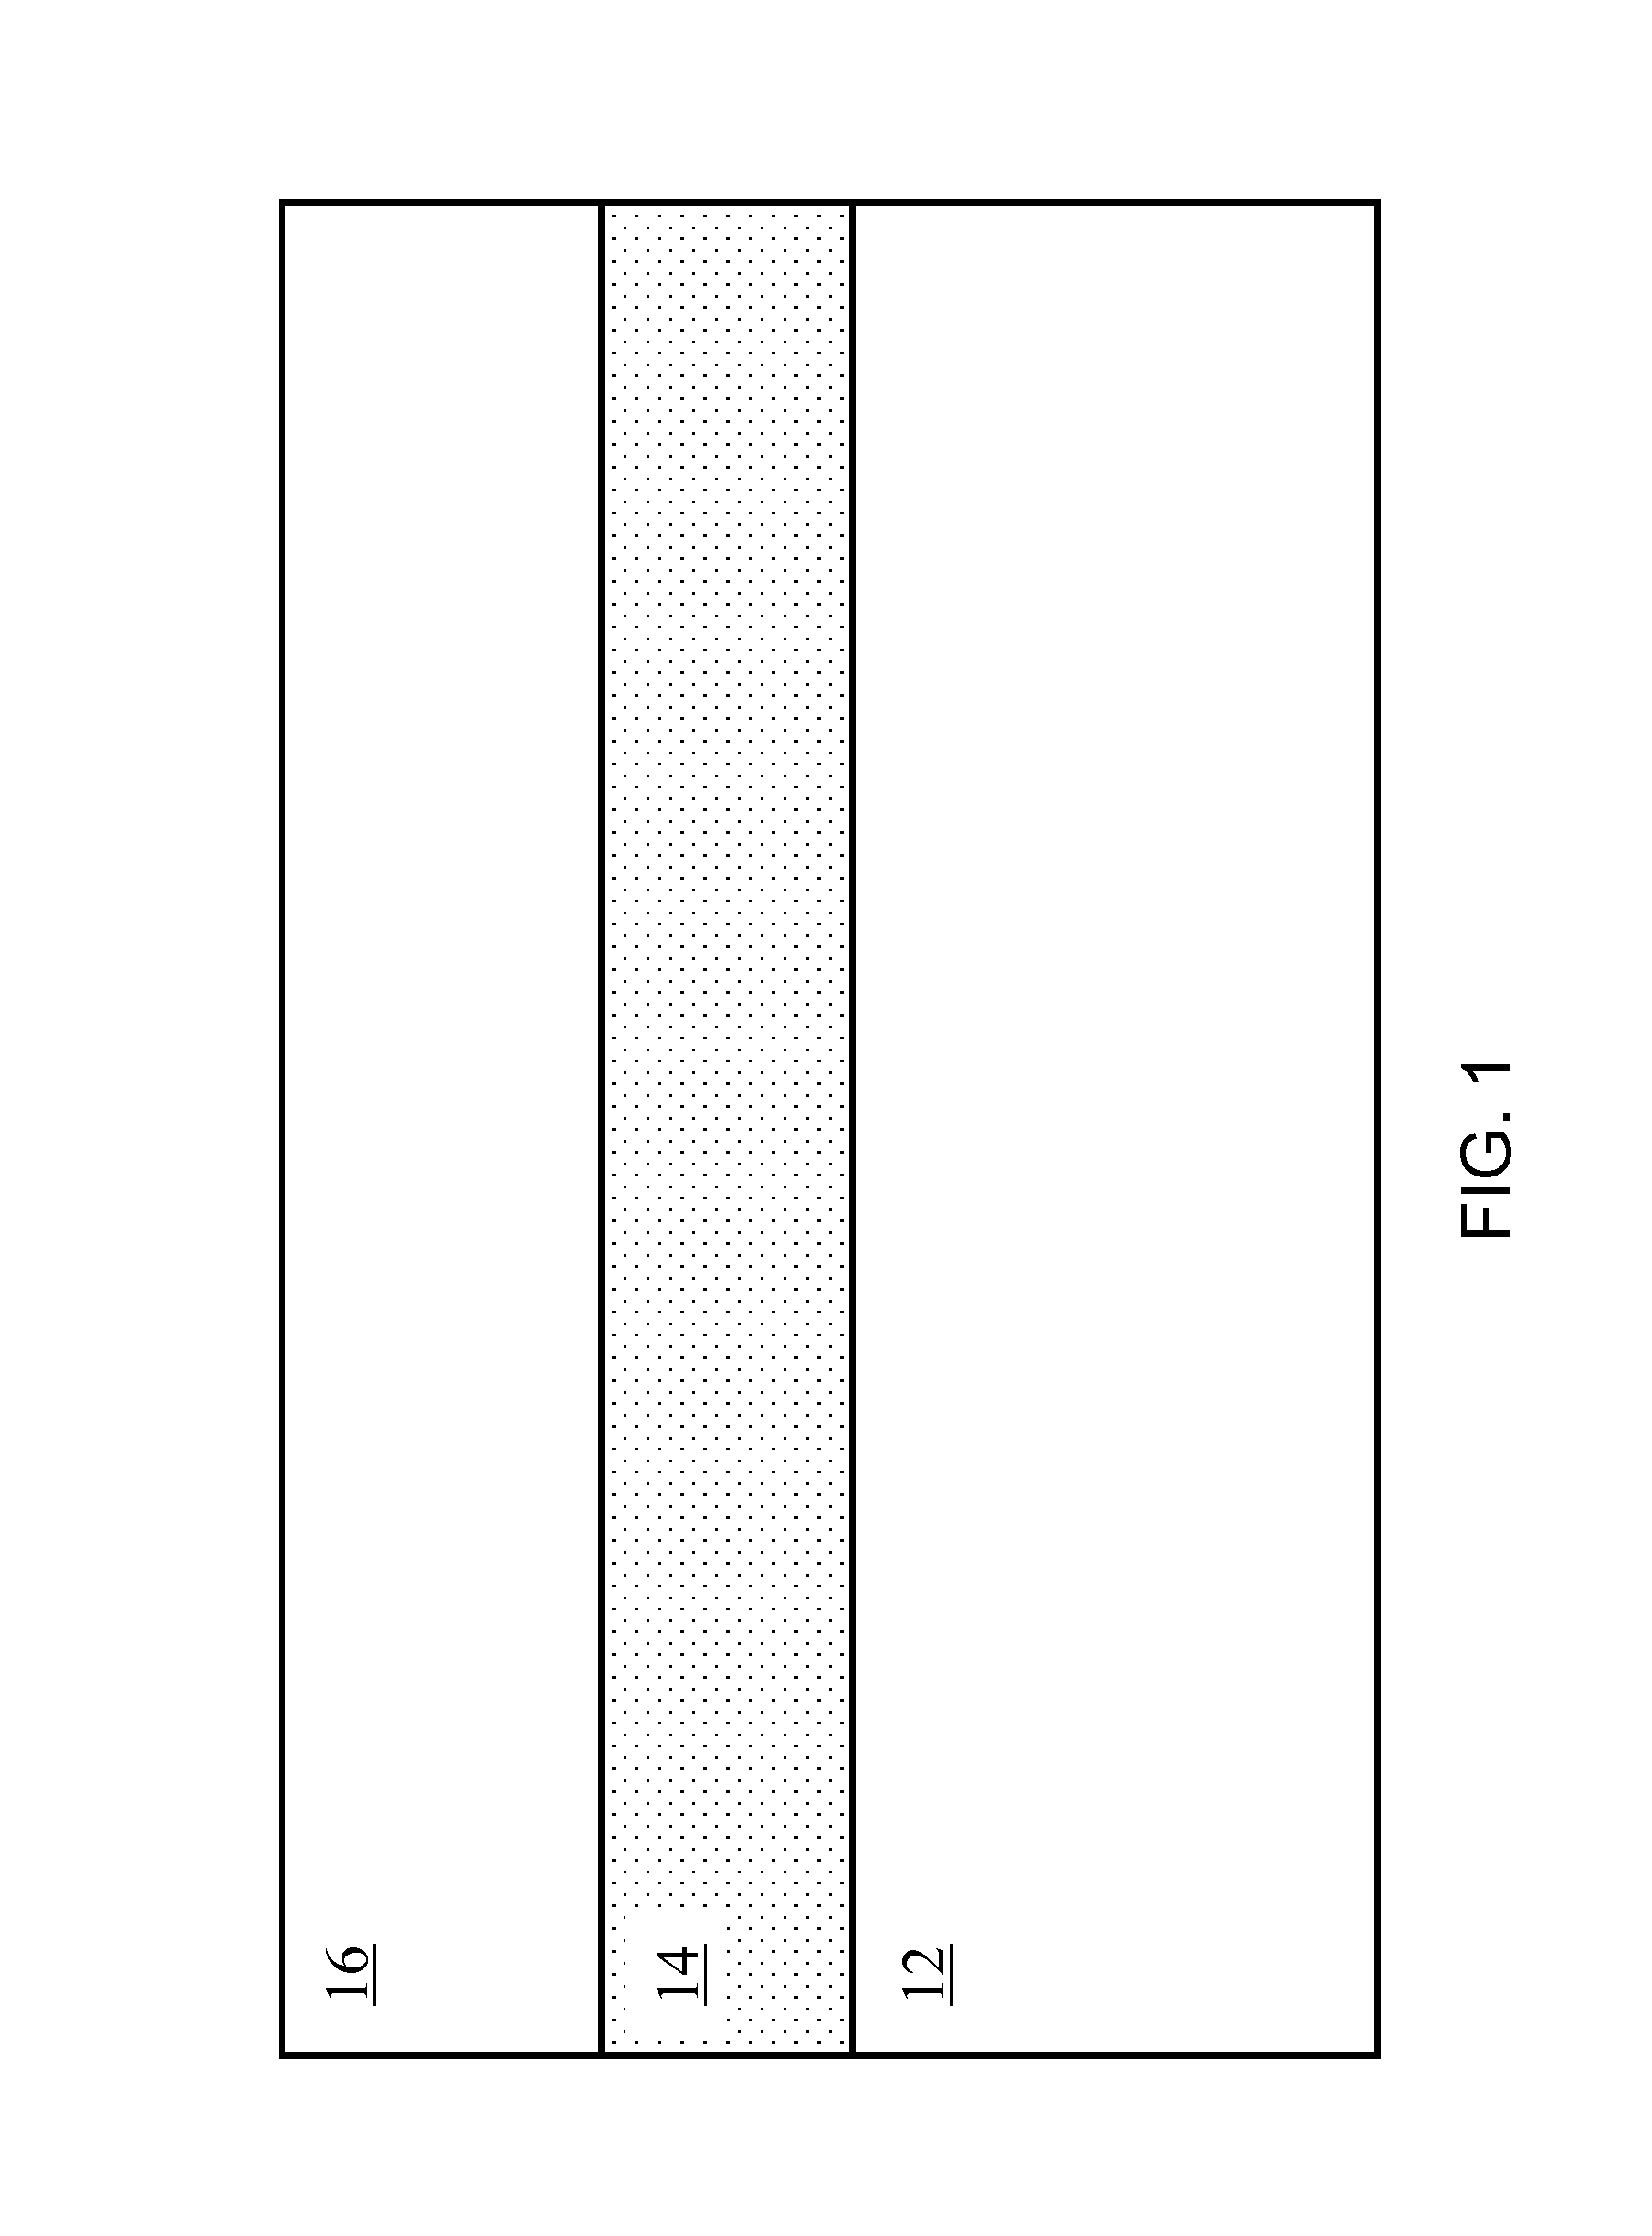 Junctionless tunnel fet with metal-insulator transition material